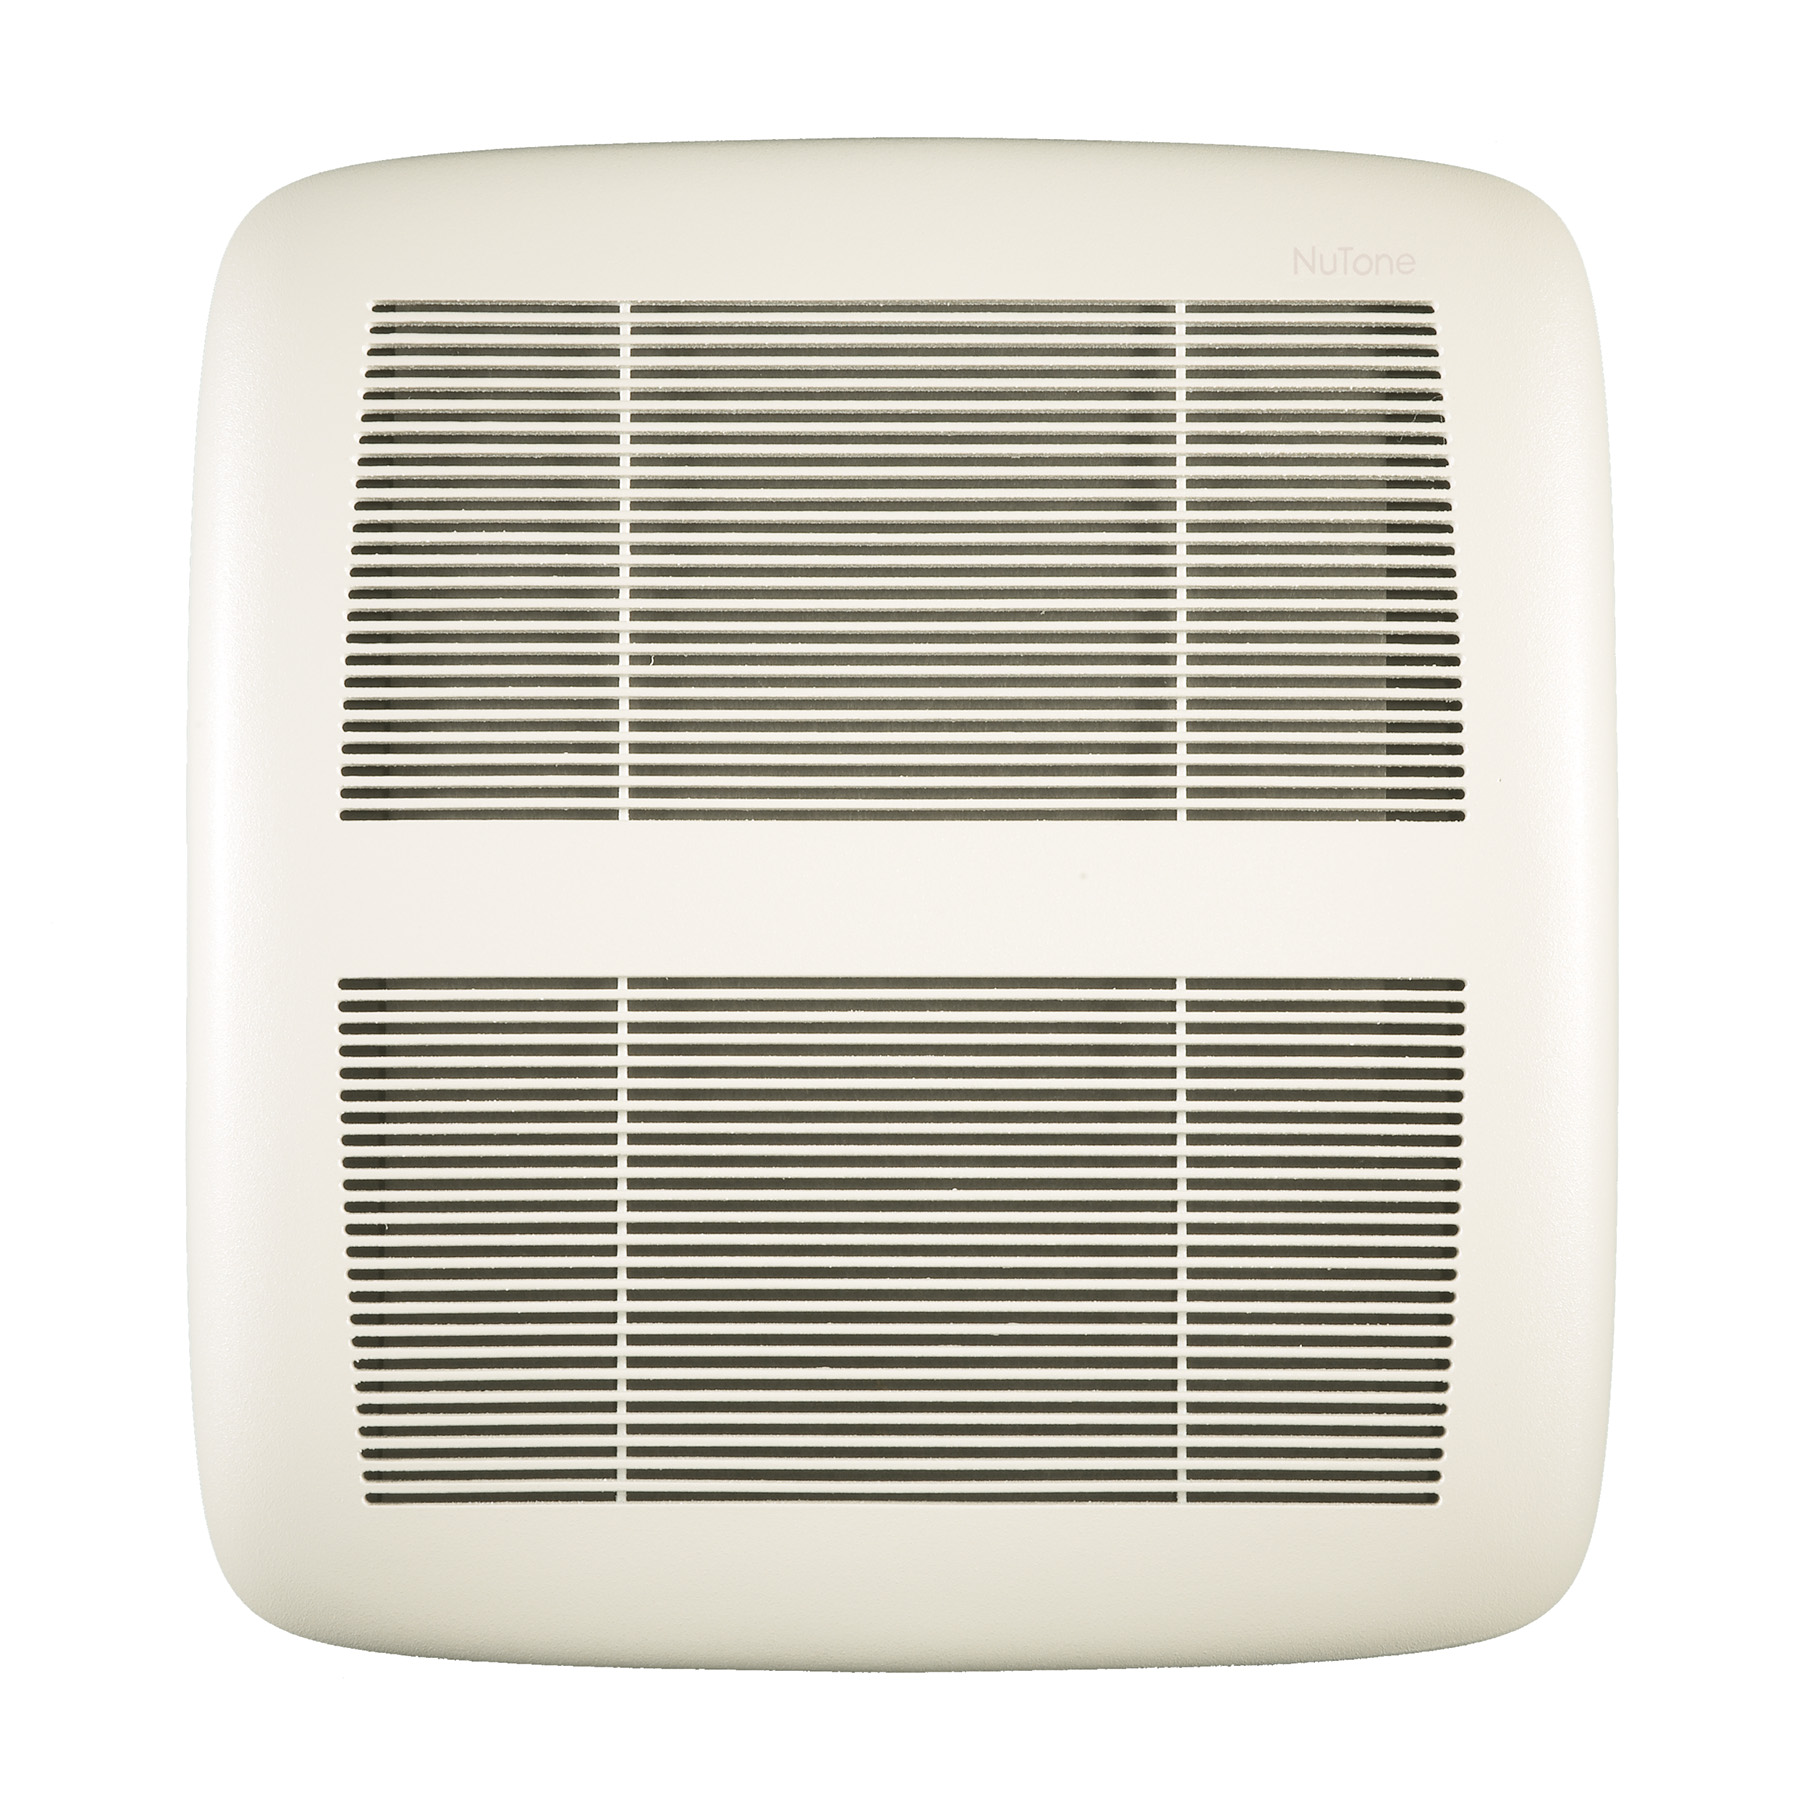 LPN80 NuTone® 80 CFM Ventilation Fan with White Grille, ENERGY STAR®